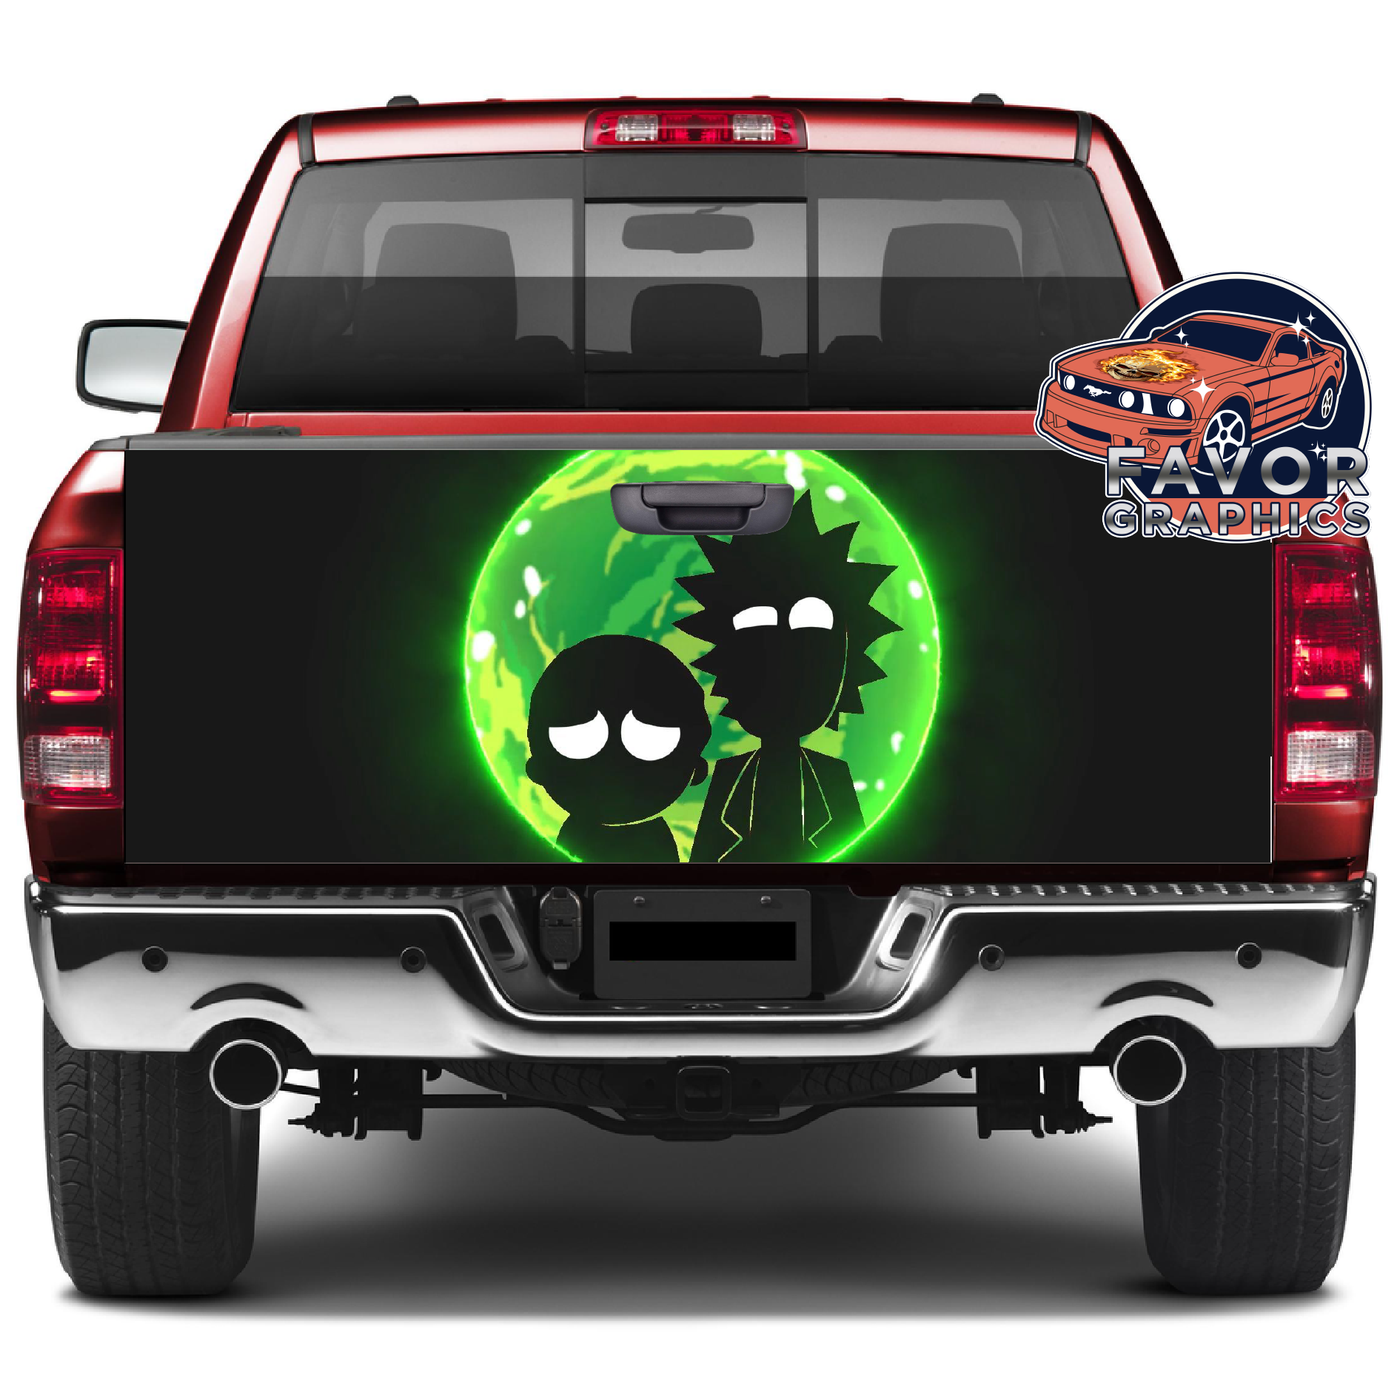 Rick and Morty Tailgate Wraps For Trucks SUV Vinyl Wrap